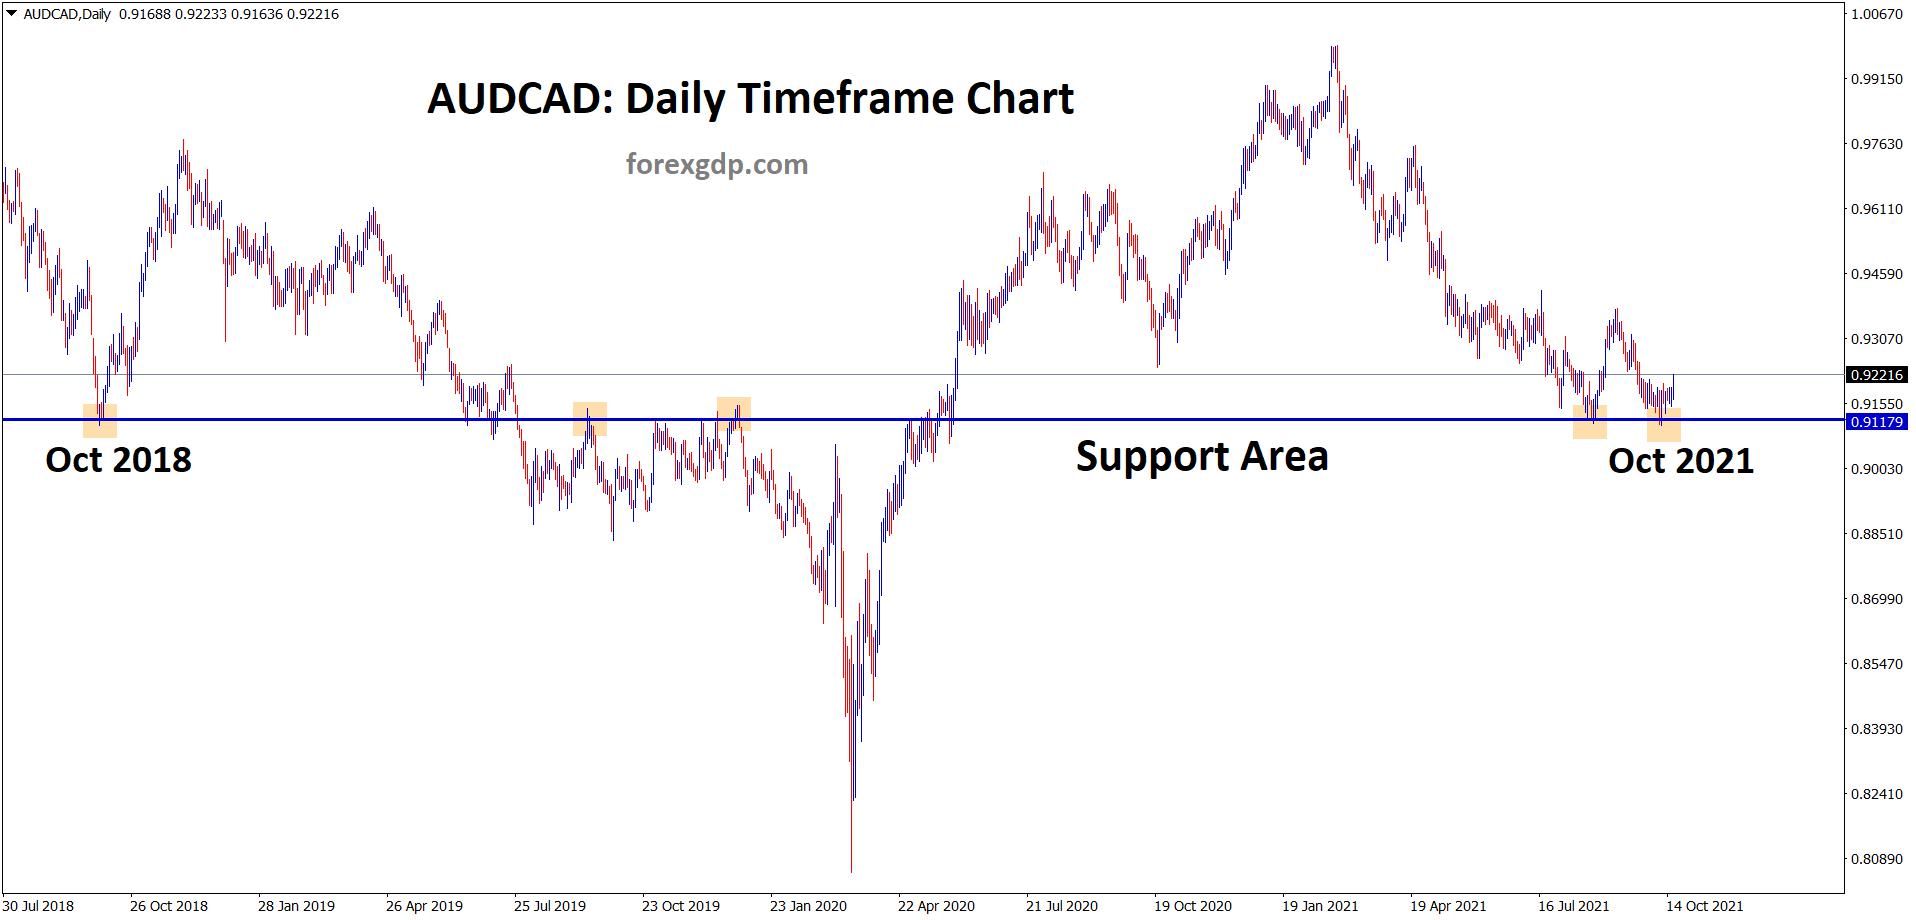 AUDCAD: Rebounding from the Multi-year support